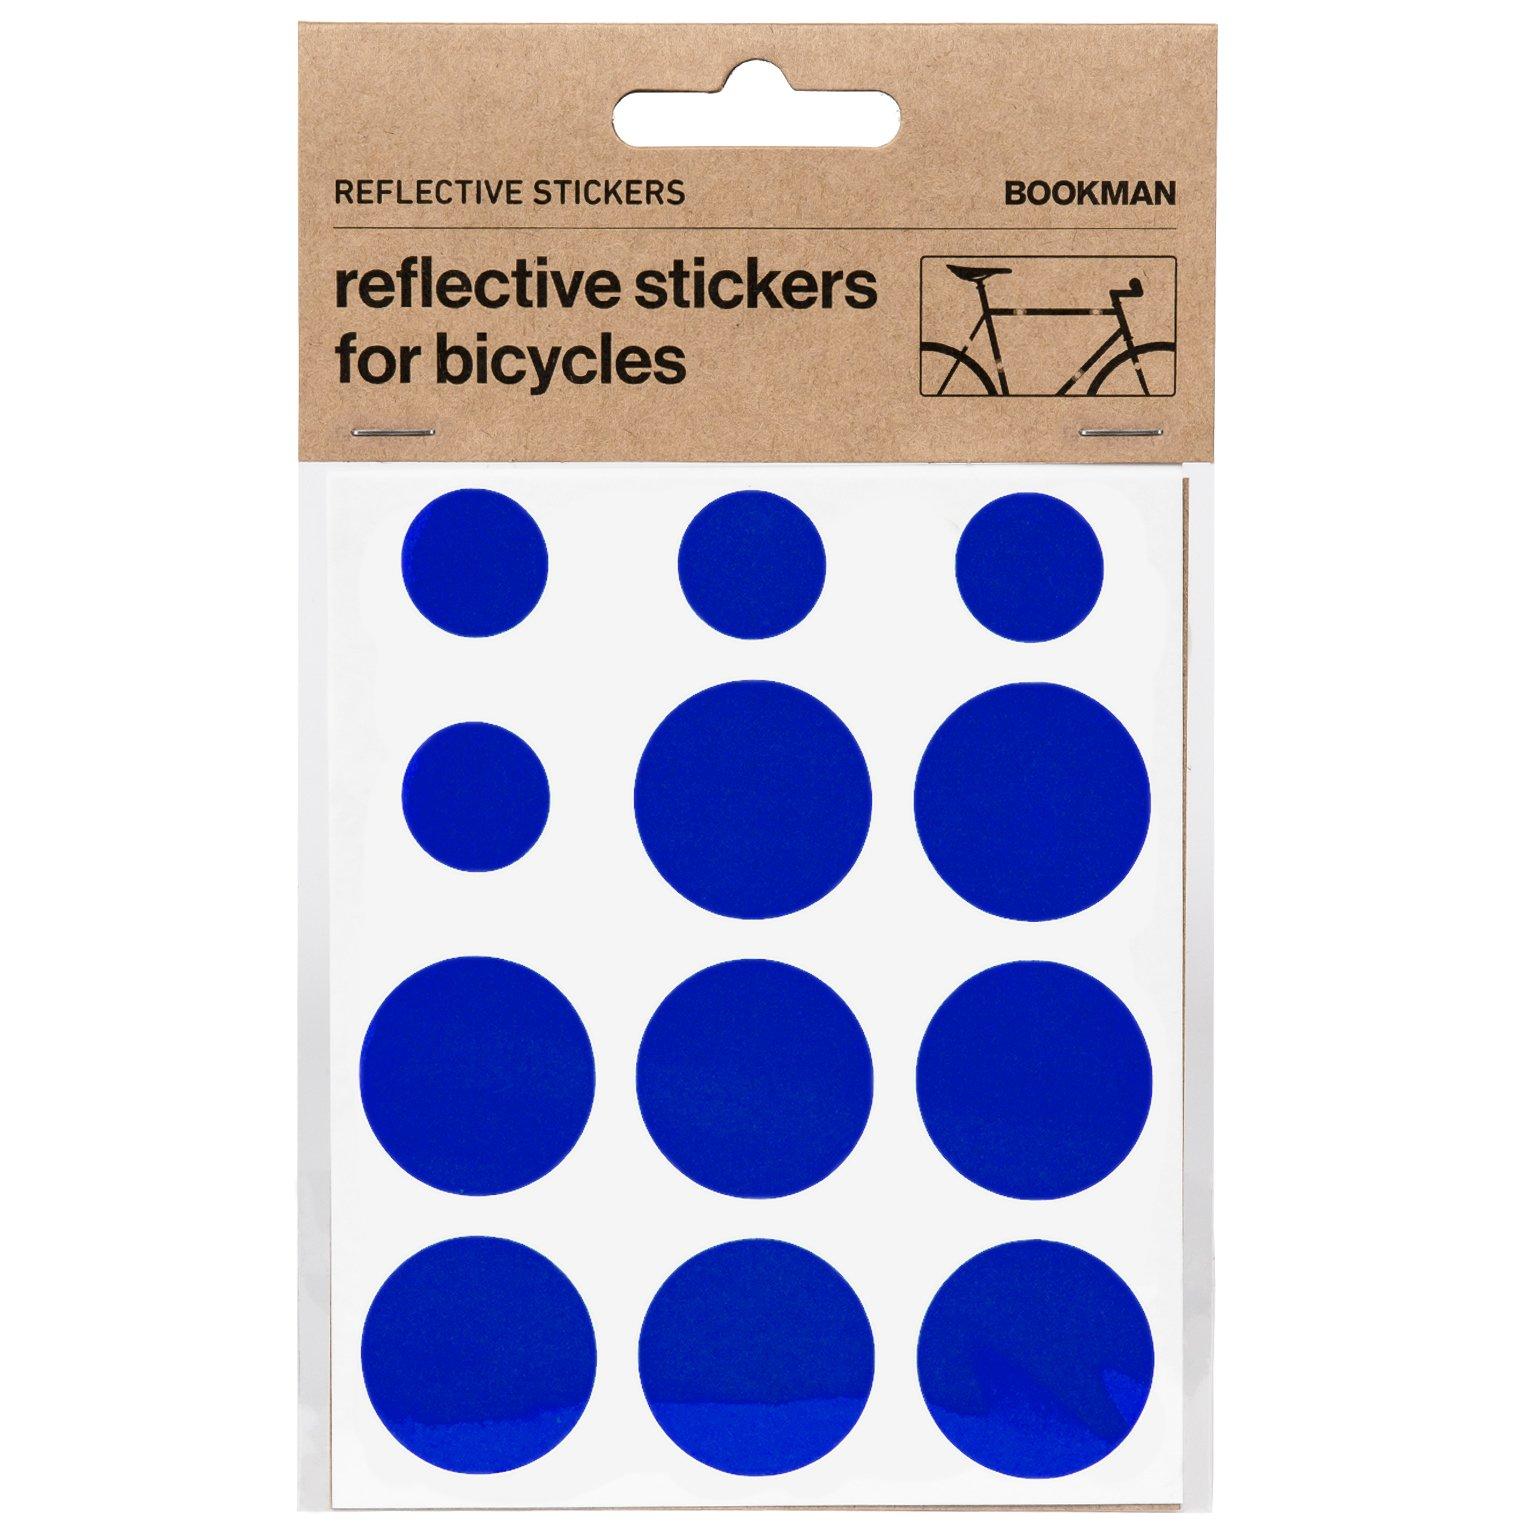 Bookman Reflective Stickers - Blue